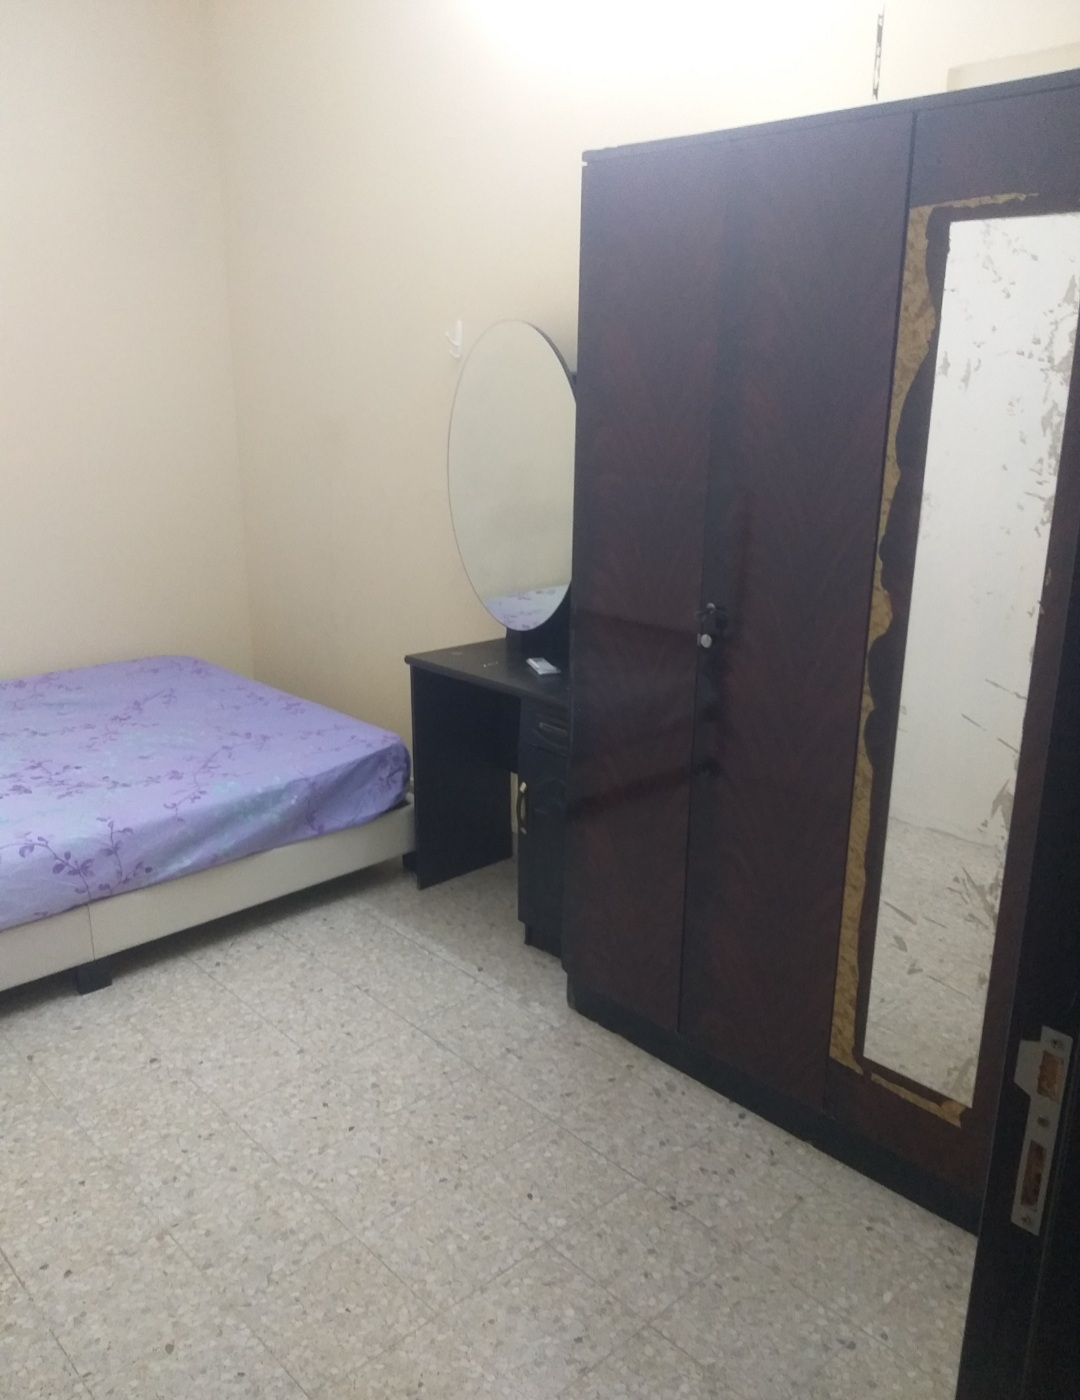 2100 Including Dewa Fully Furnished Partition Room Available Near Karama Adcb Metro Station